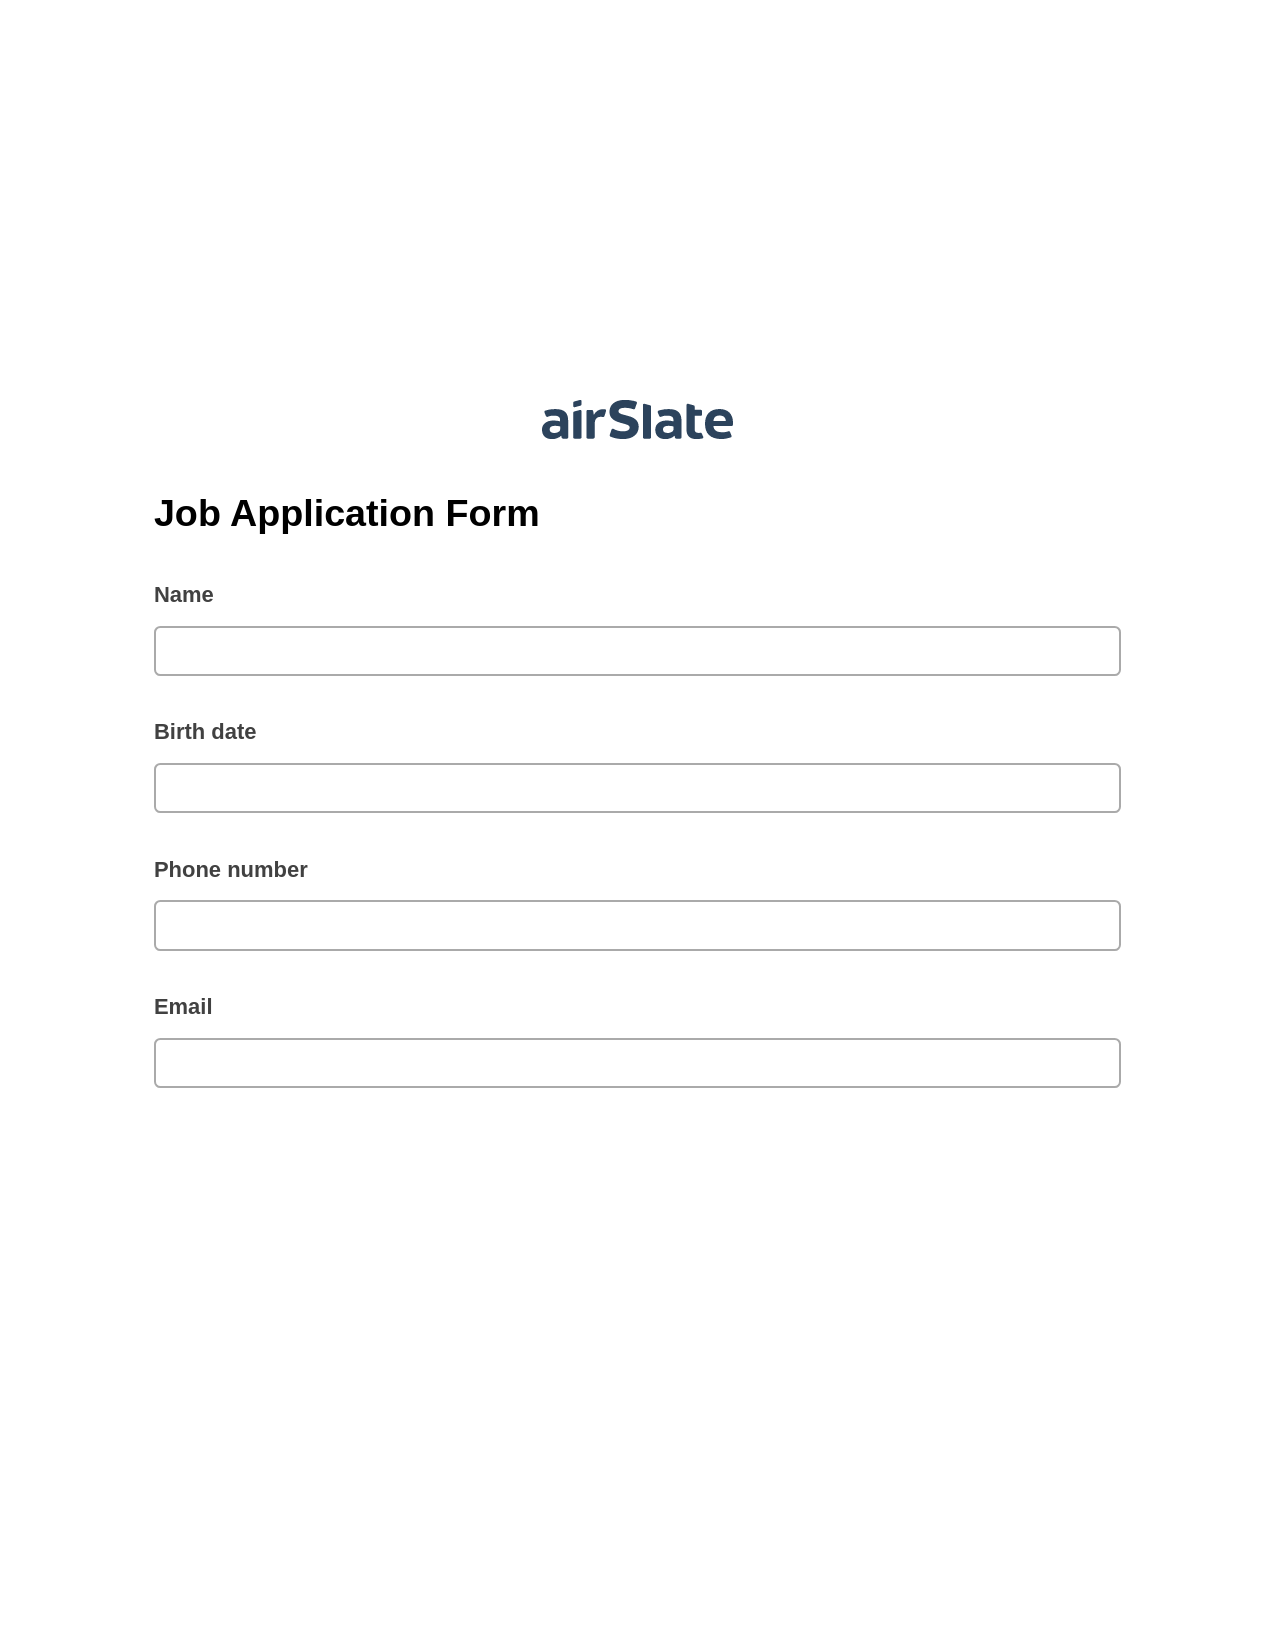 Multirole Job Application Form Pre-fill from another Slate Bot, Create MS Dynamics 365 Records Bot, Export to Smartsheet